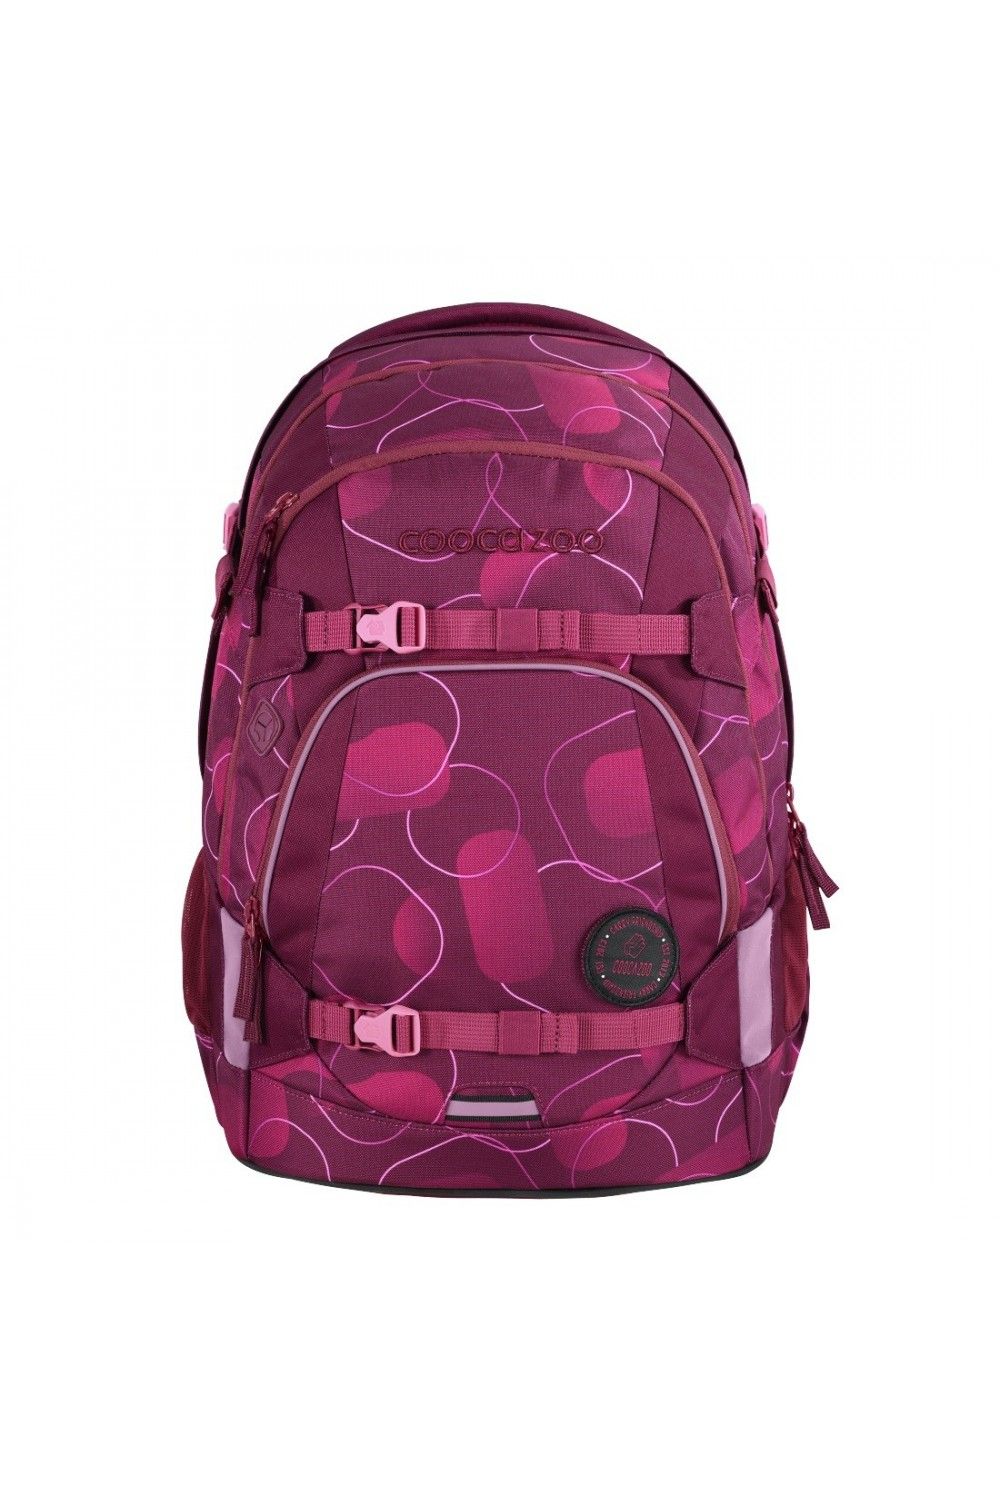 School backpack Coocazoo MATE Berry Bubbles